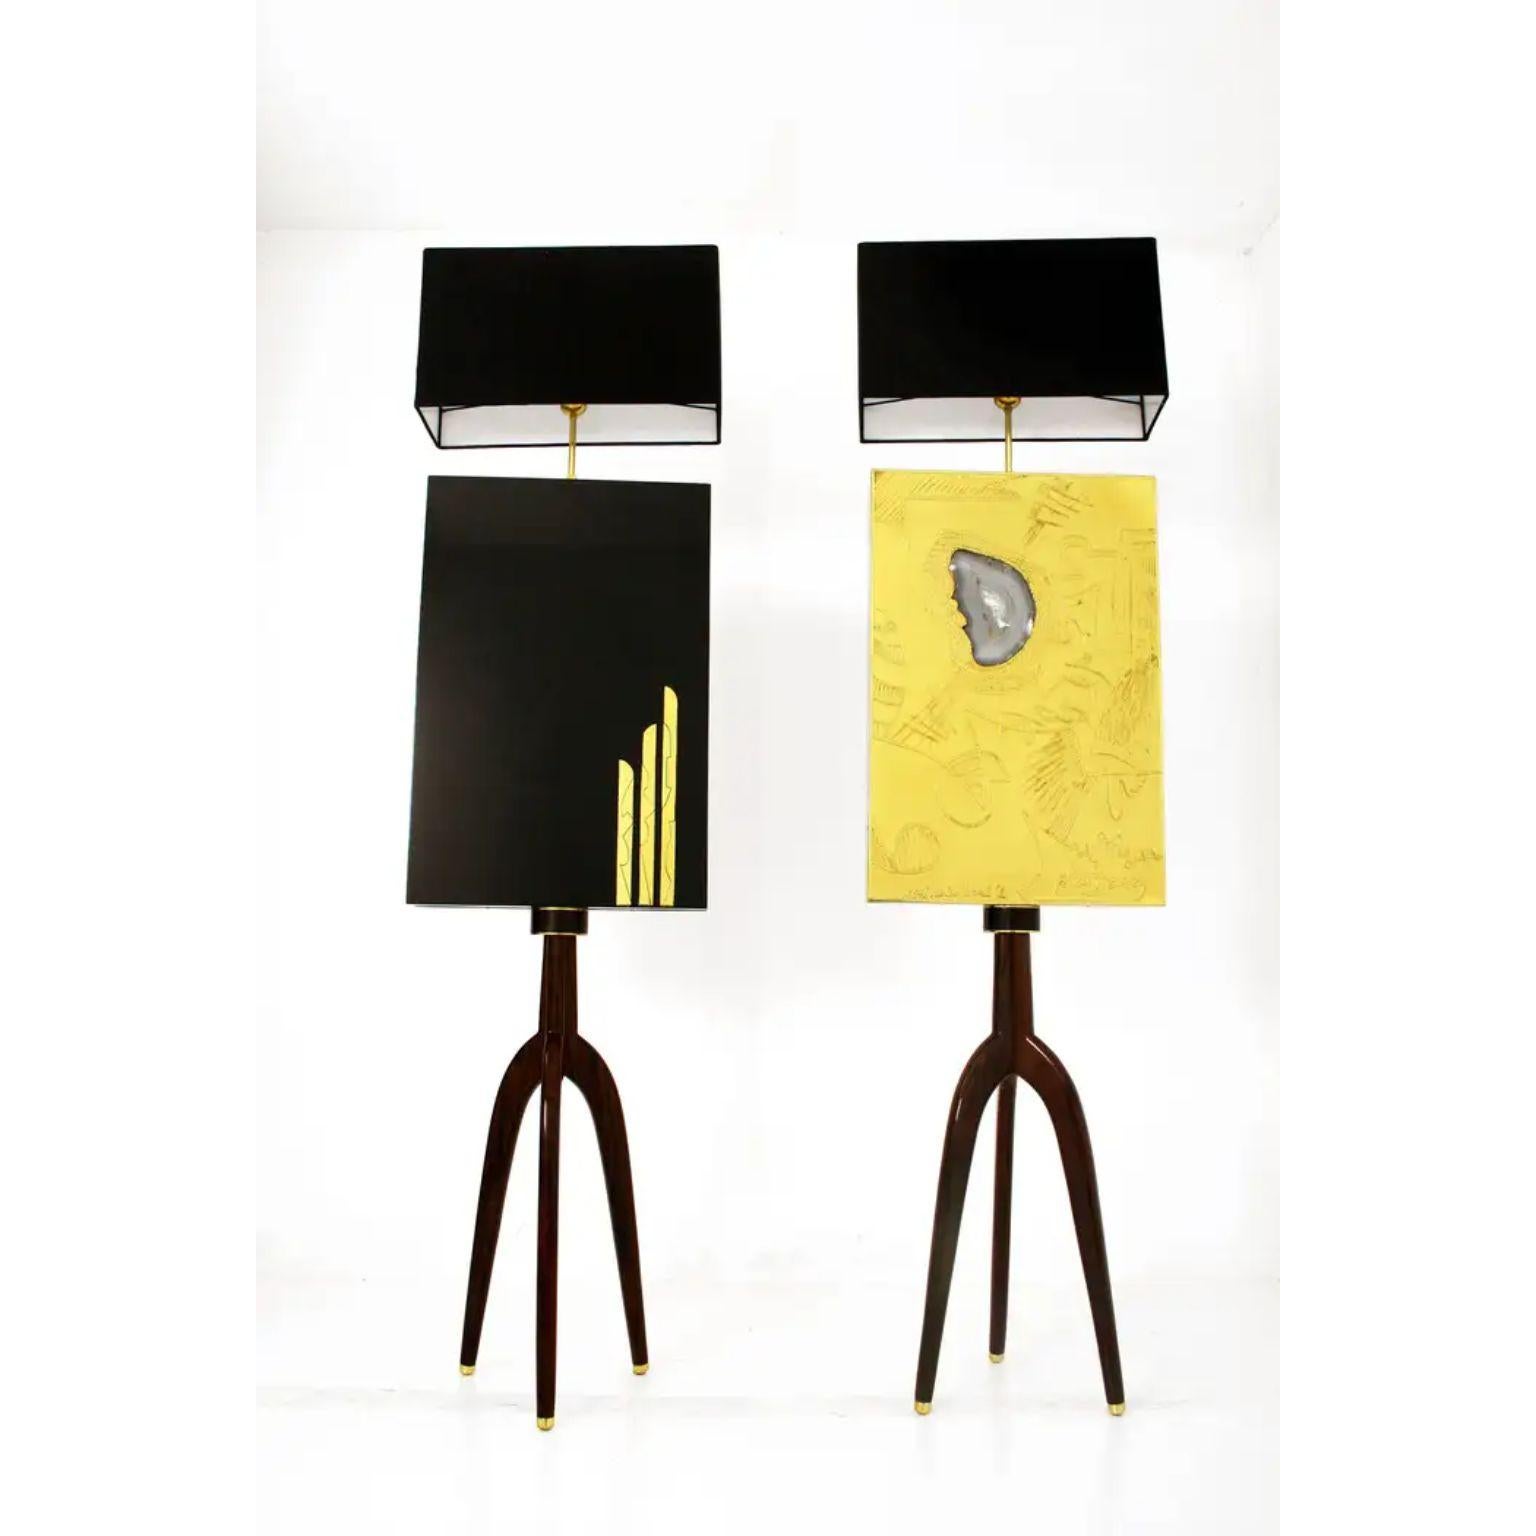 Set Of 2 Couple Brass Floor Lamps by Brutalist Be
One Of A Kind
Dimensions: D 27 x W 35 x H 152 cm.
Materials: Brass and agate stone.

Brass acid etched black patinated matching floor lamp, matching drawing of woman and man with agate stones inlay